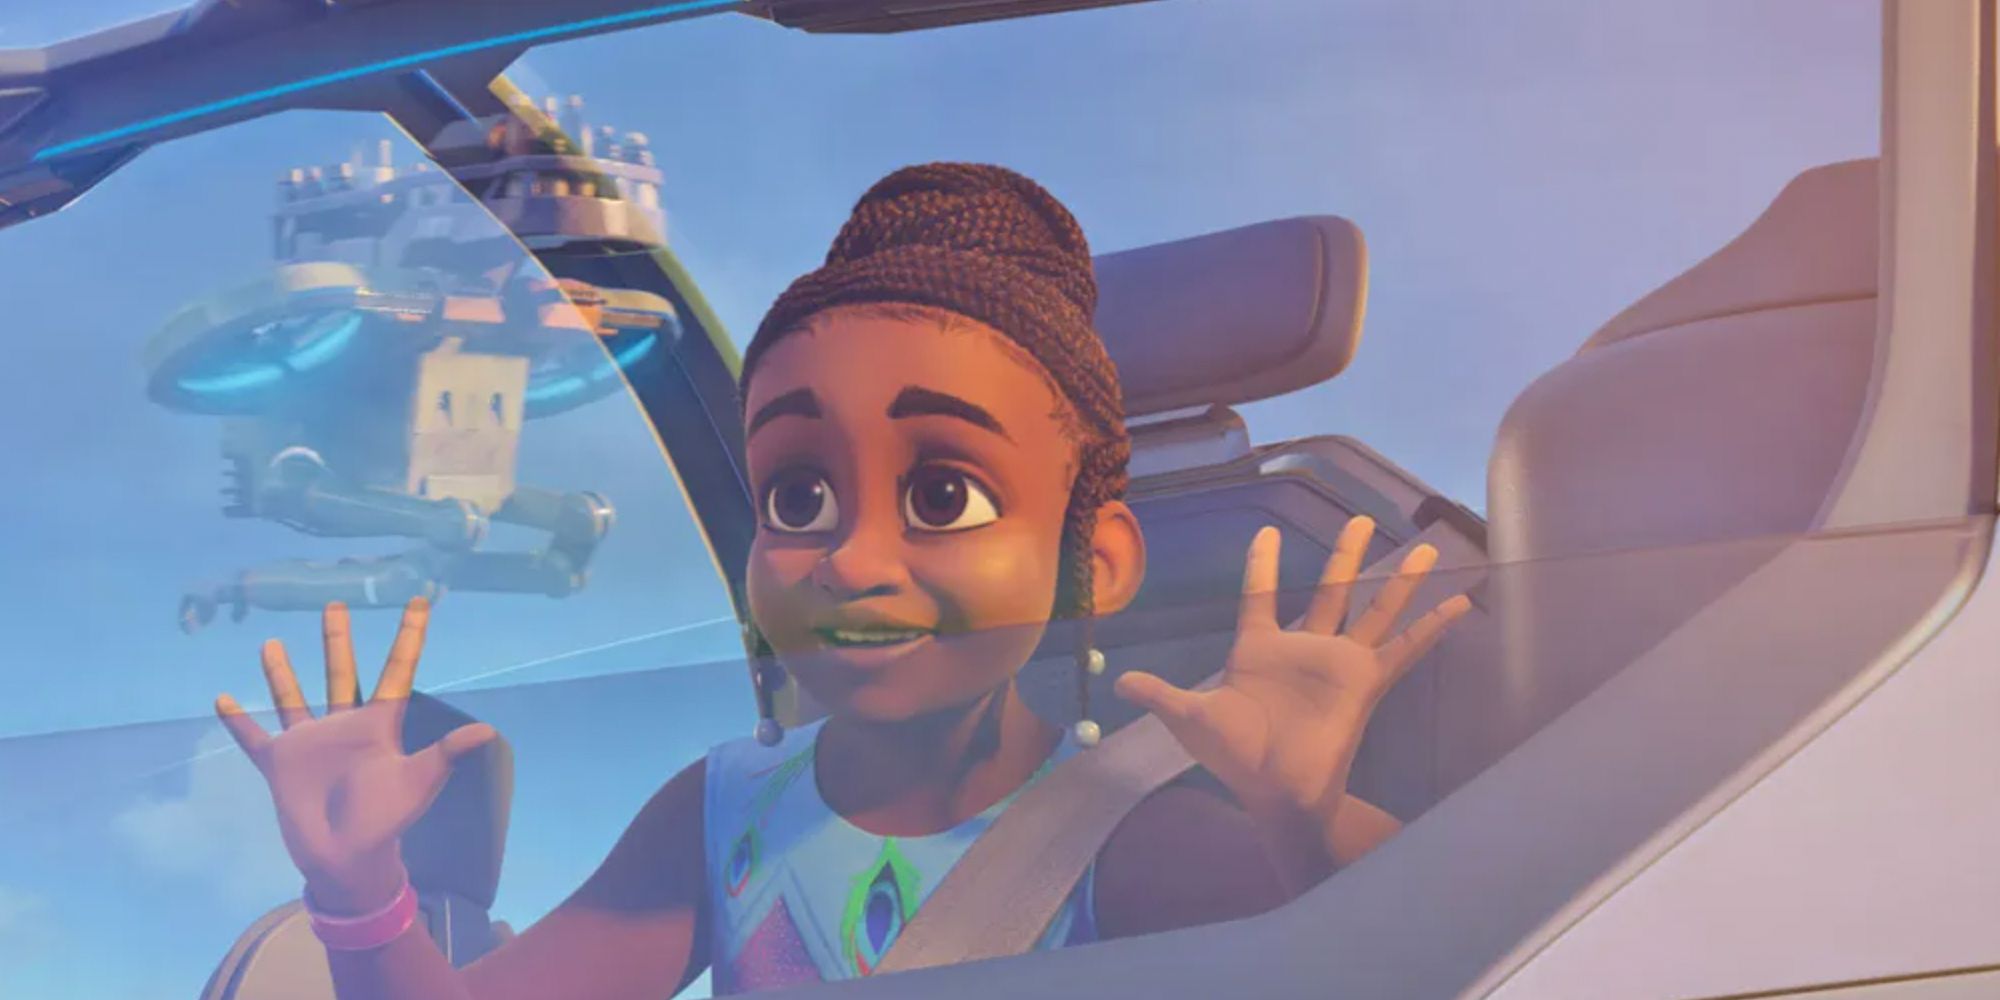 Tola pressing her hands to the window of a vehicle while a ship flies by in the animated Iwaju